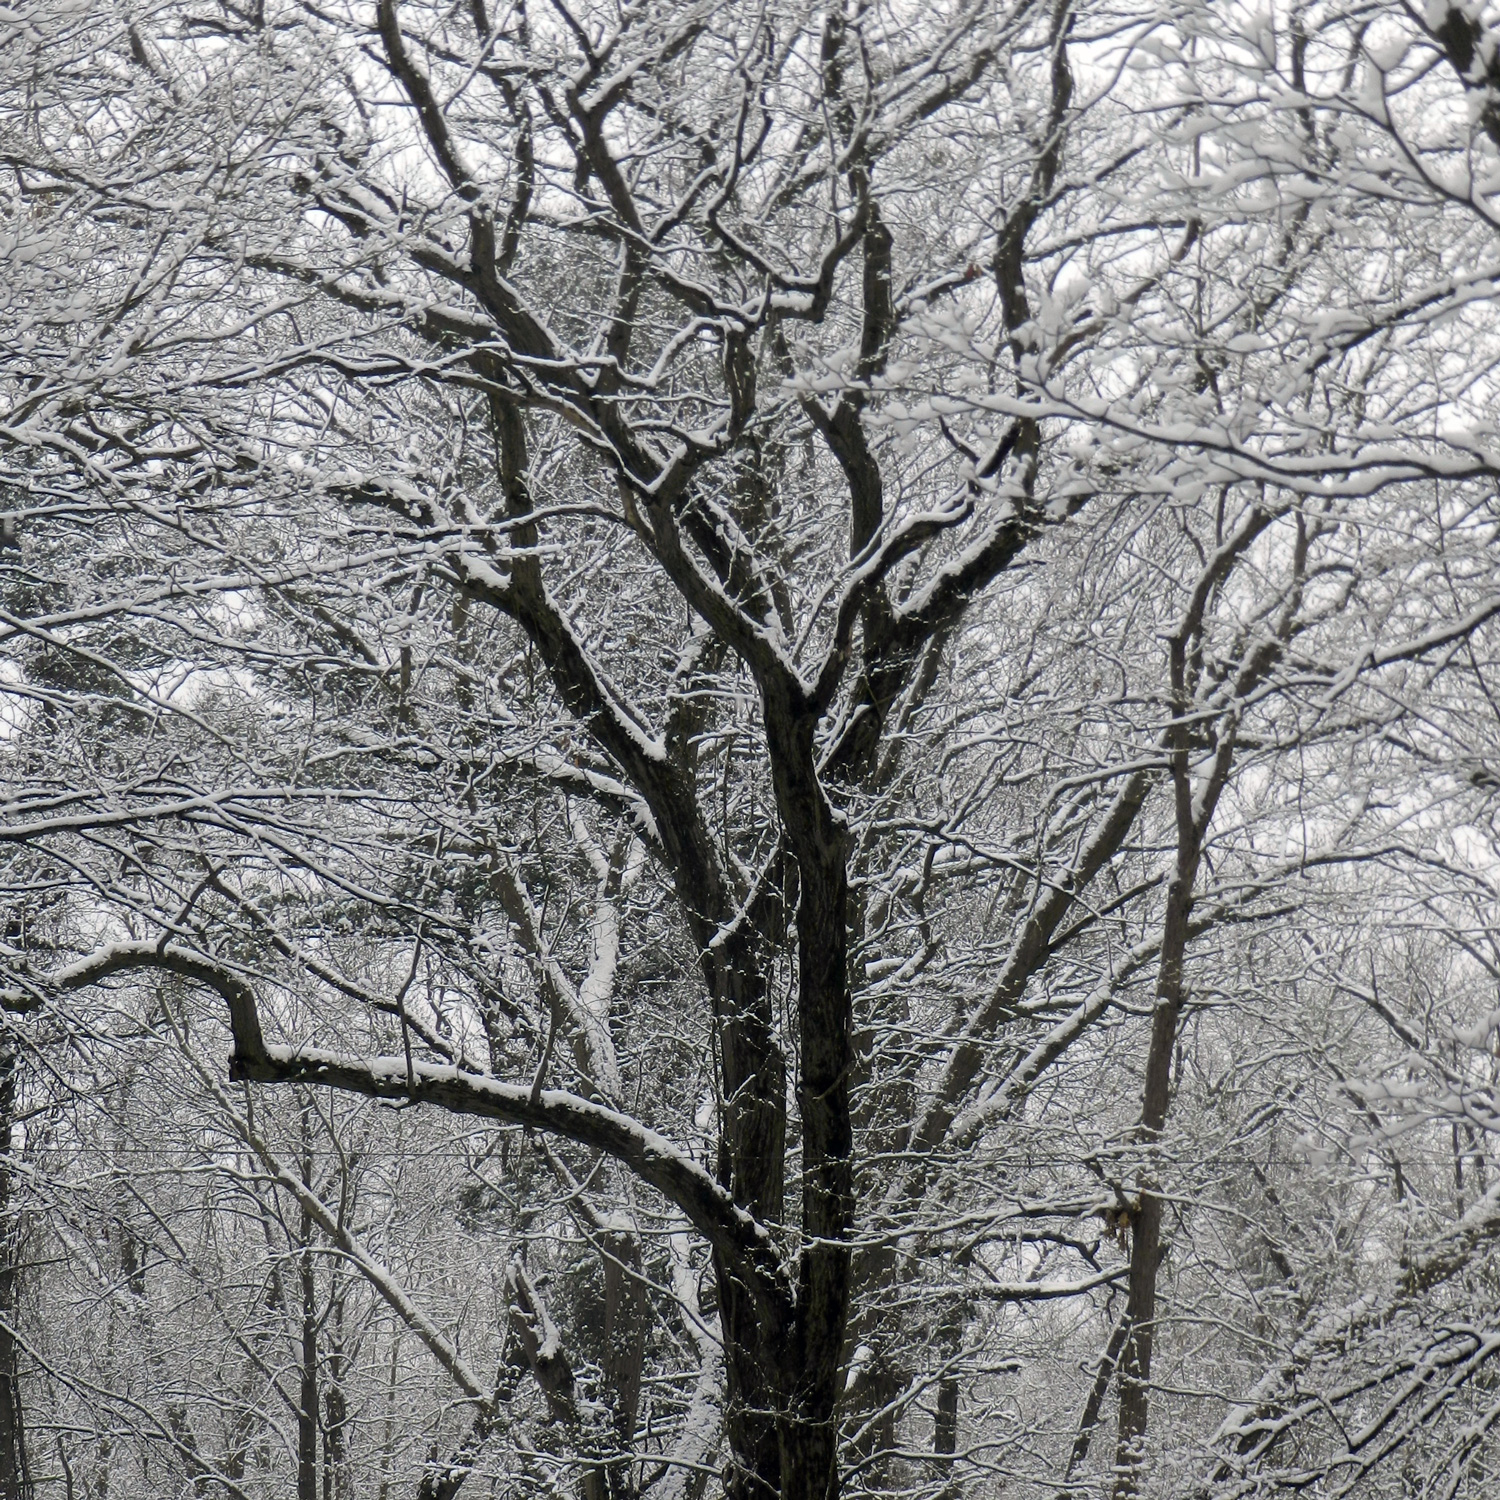 Snow clings to the crown of a mature oak.